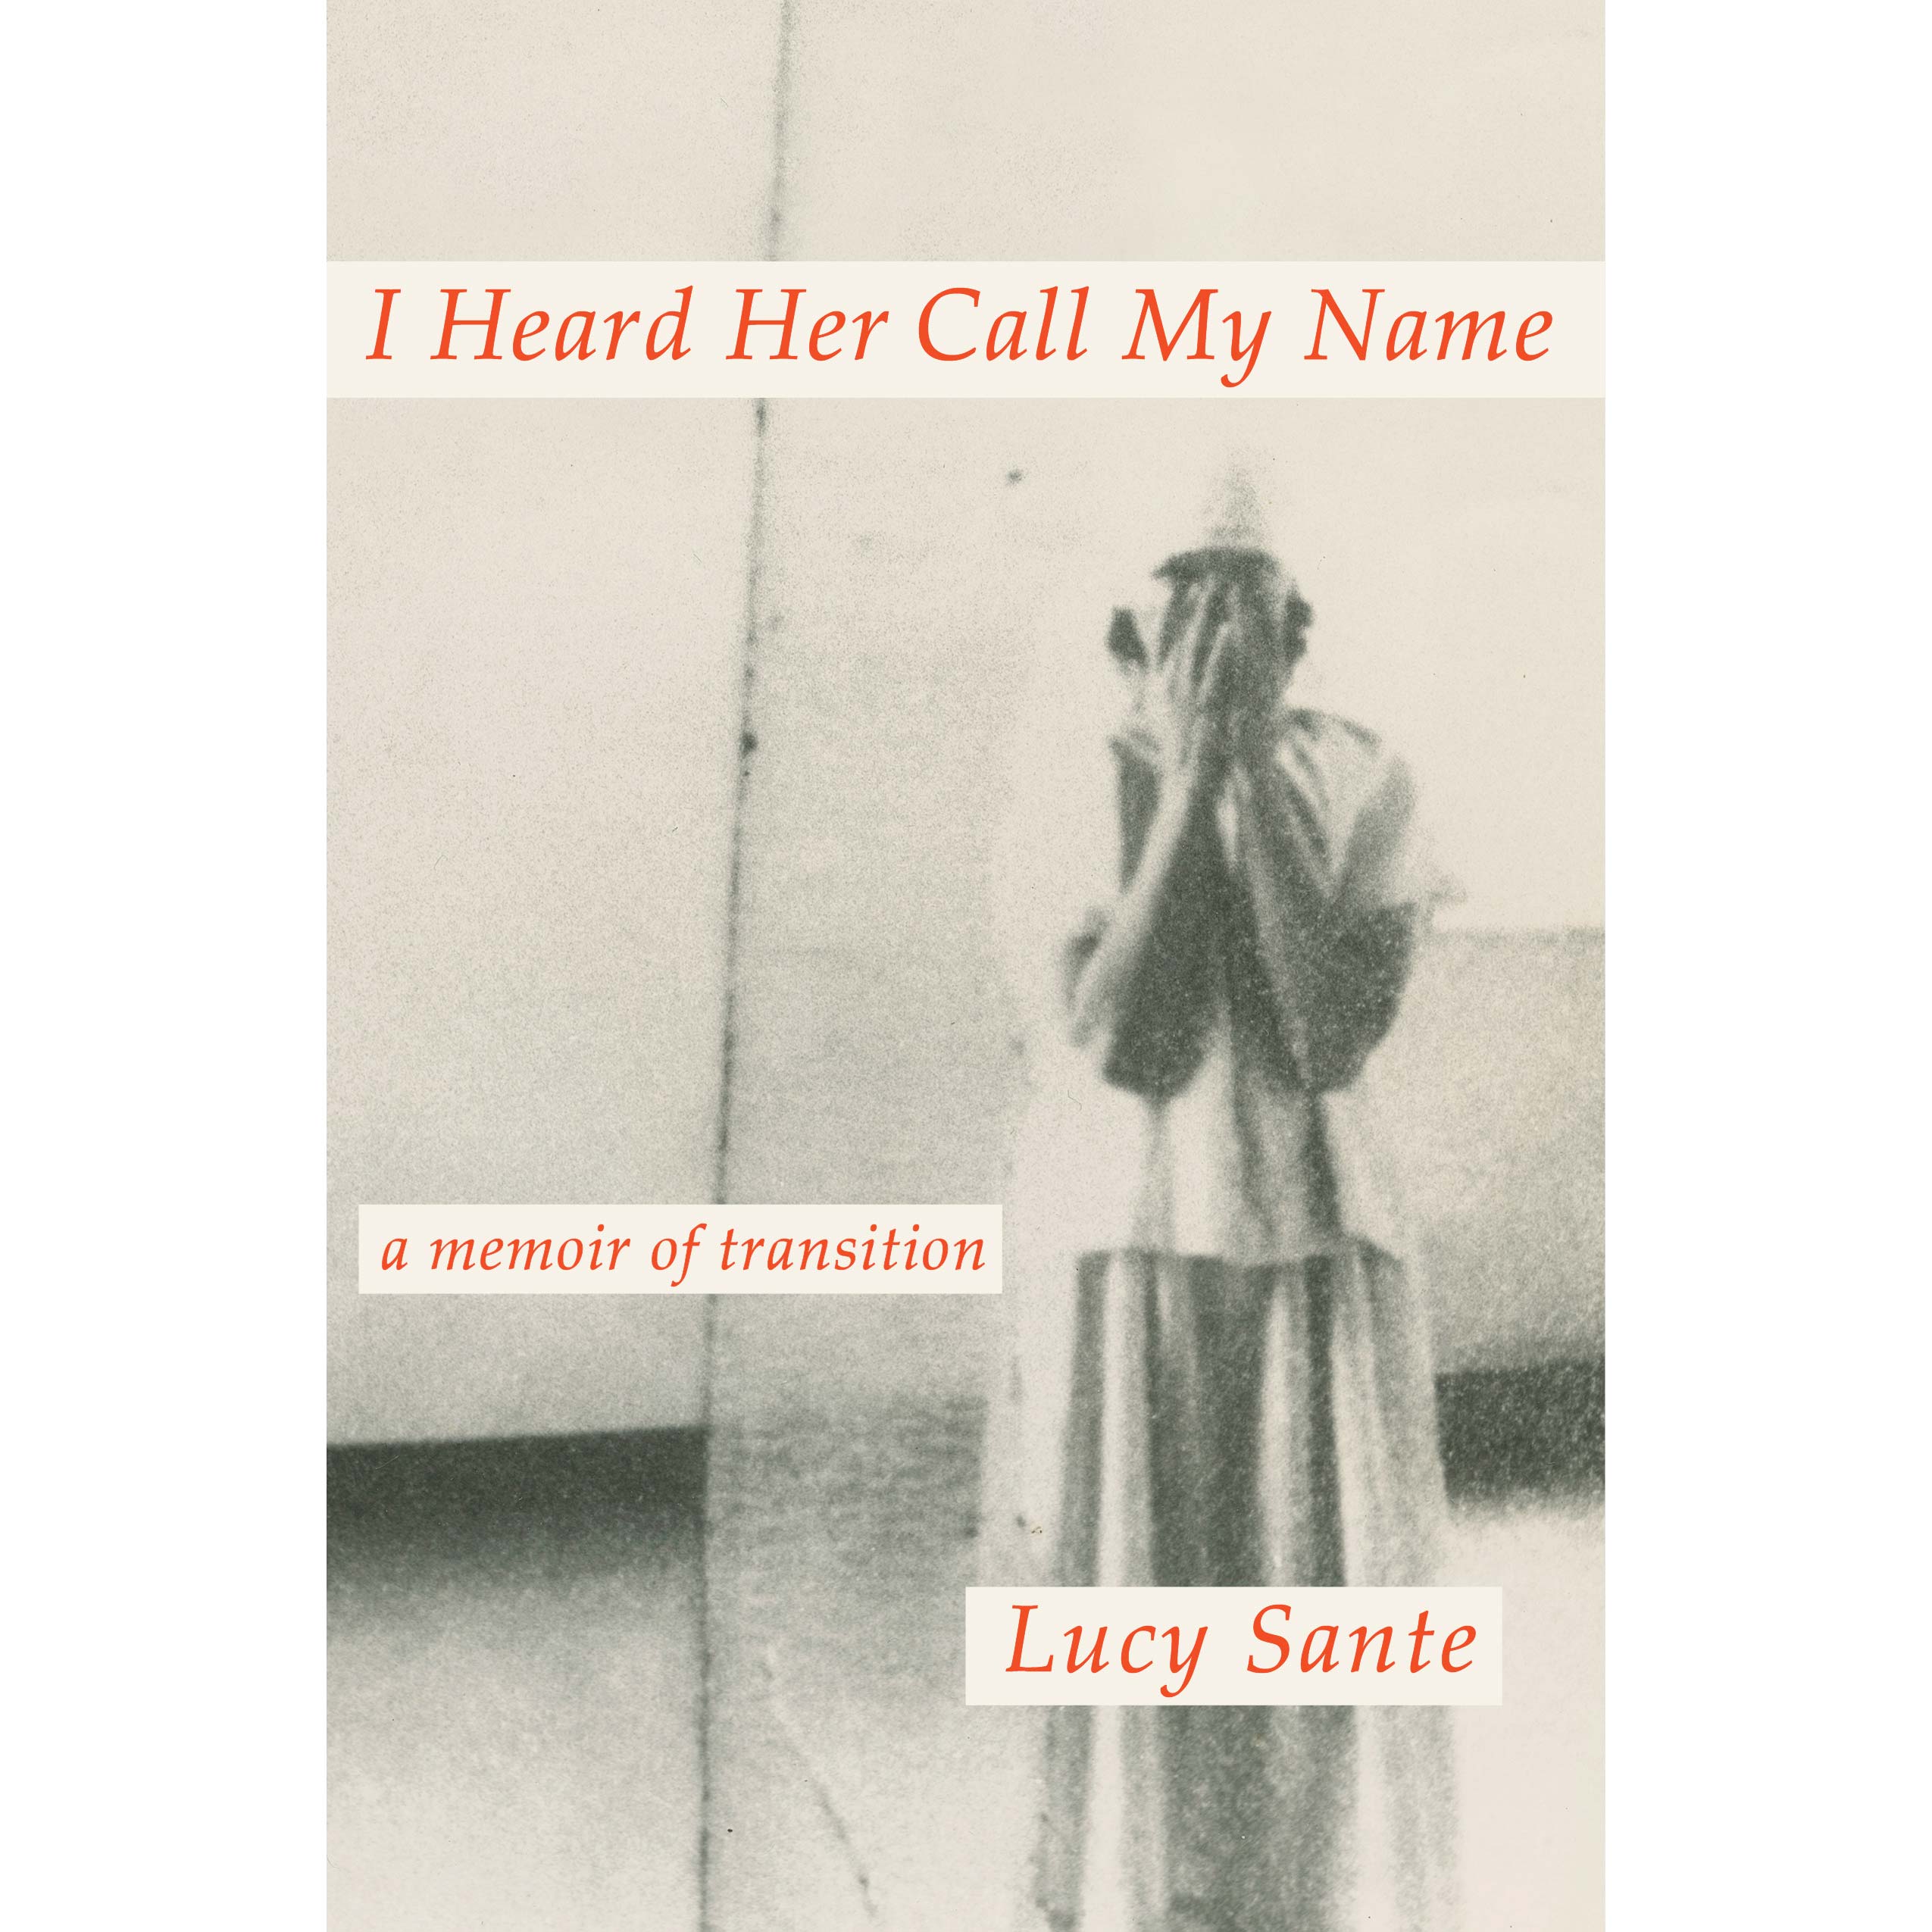 The cover of I Heard Her Call My Name.